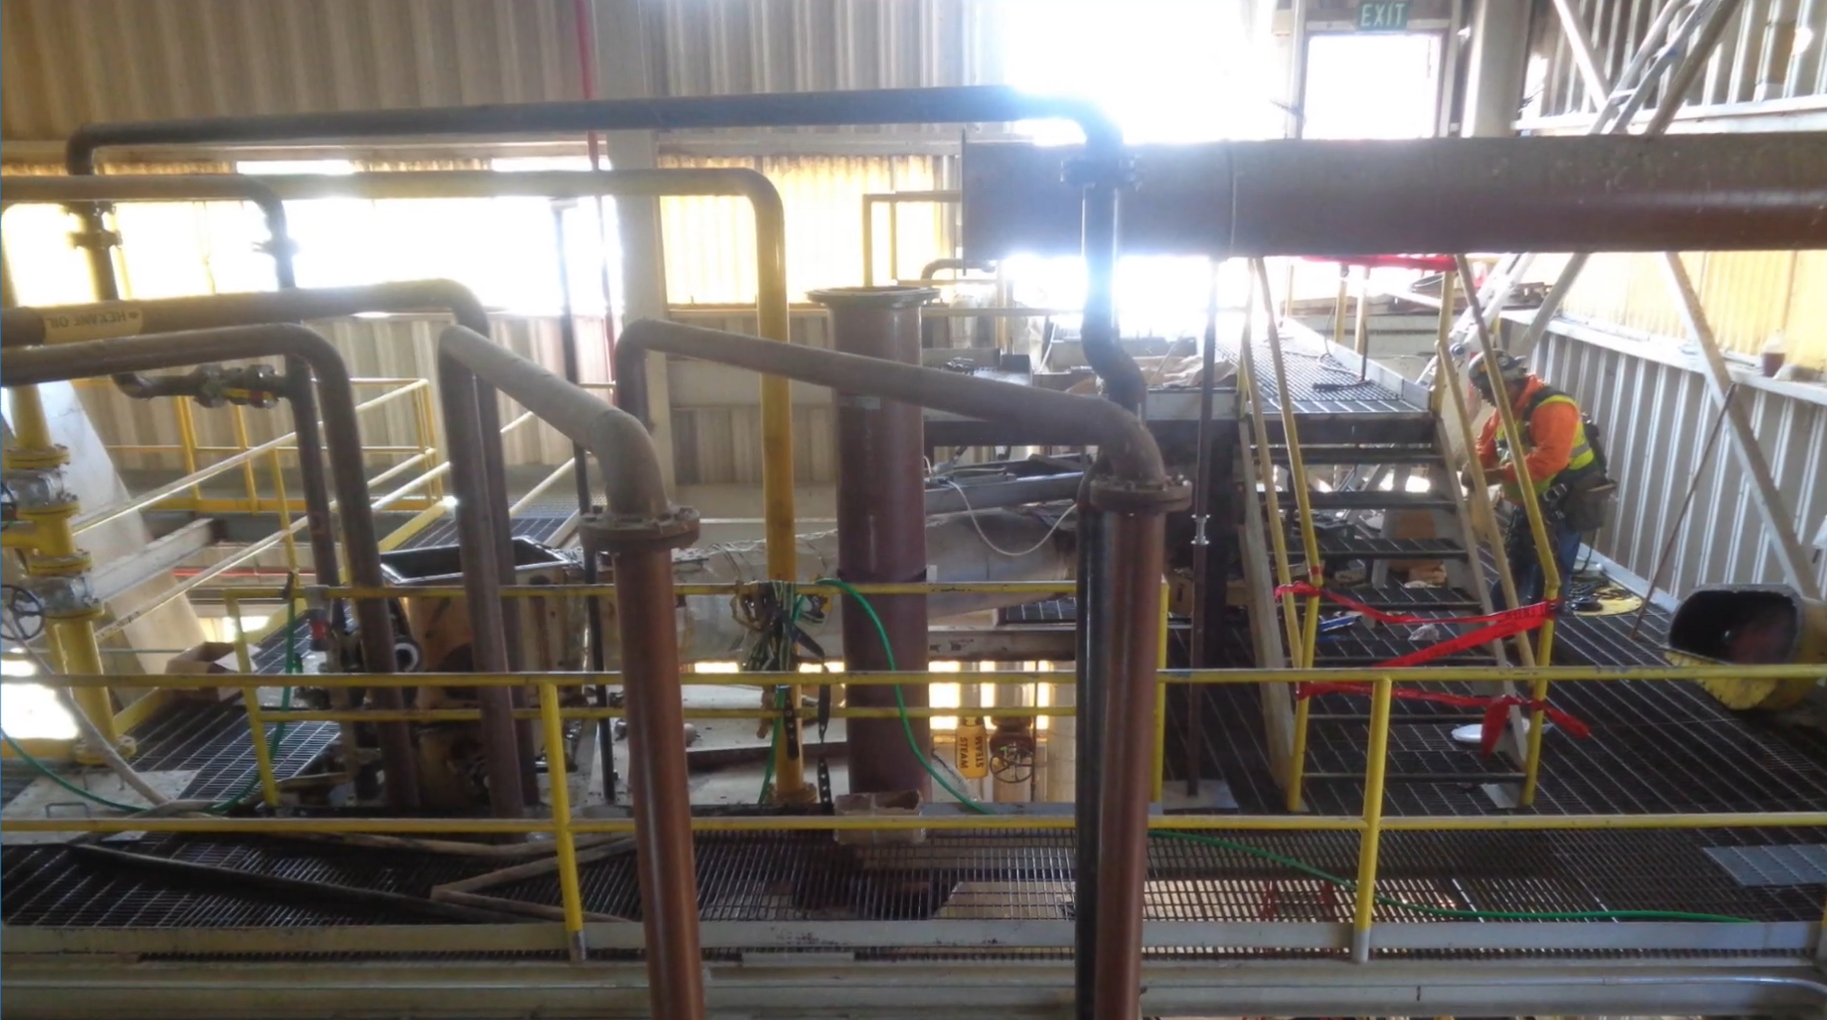 A lot of pipes and grated stairs and walkways inside an oil refinery building.